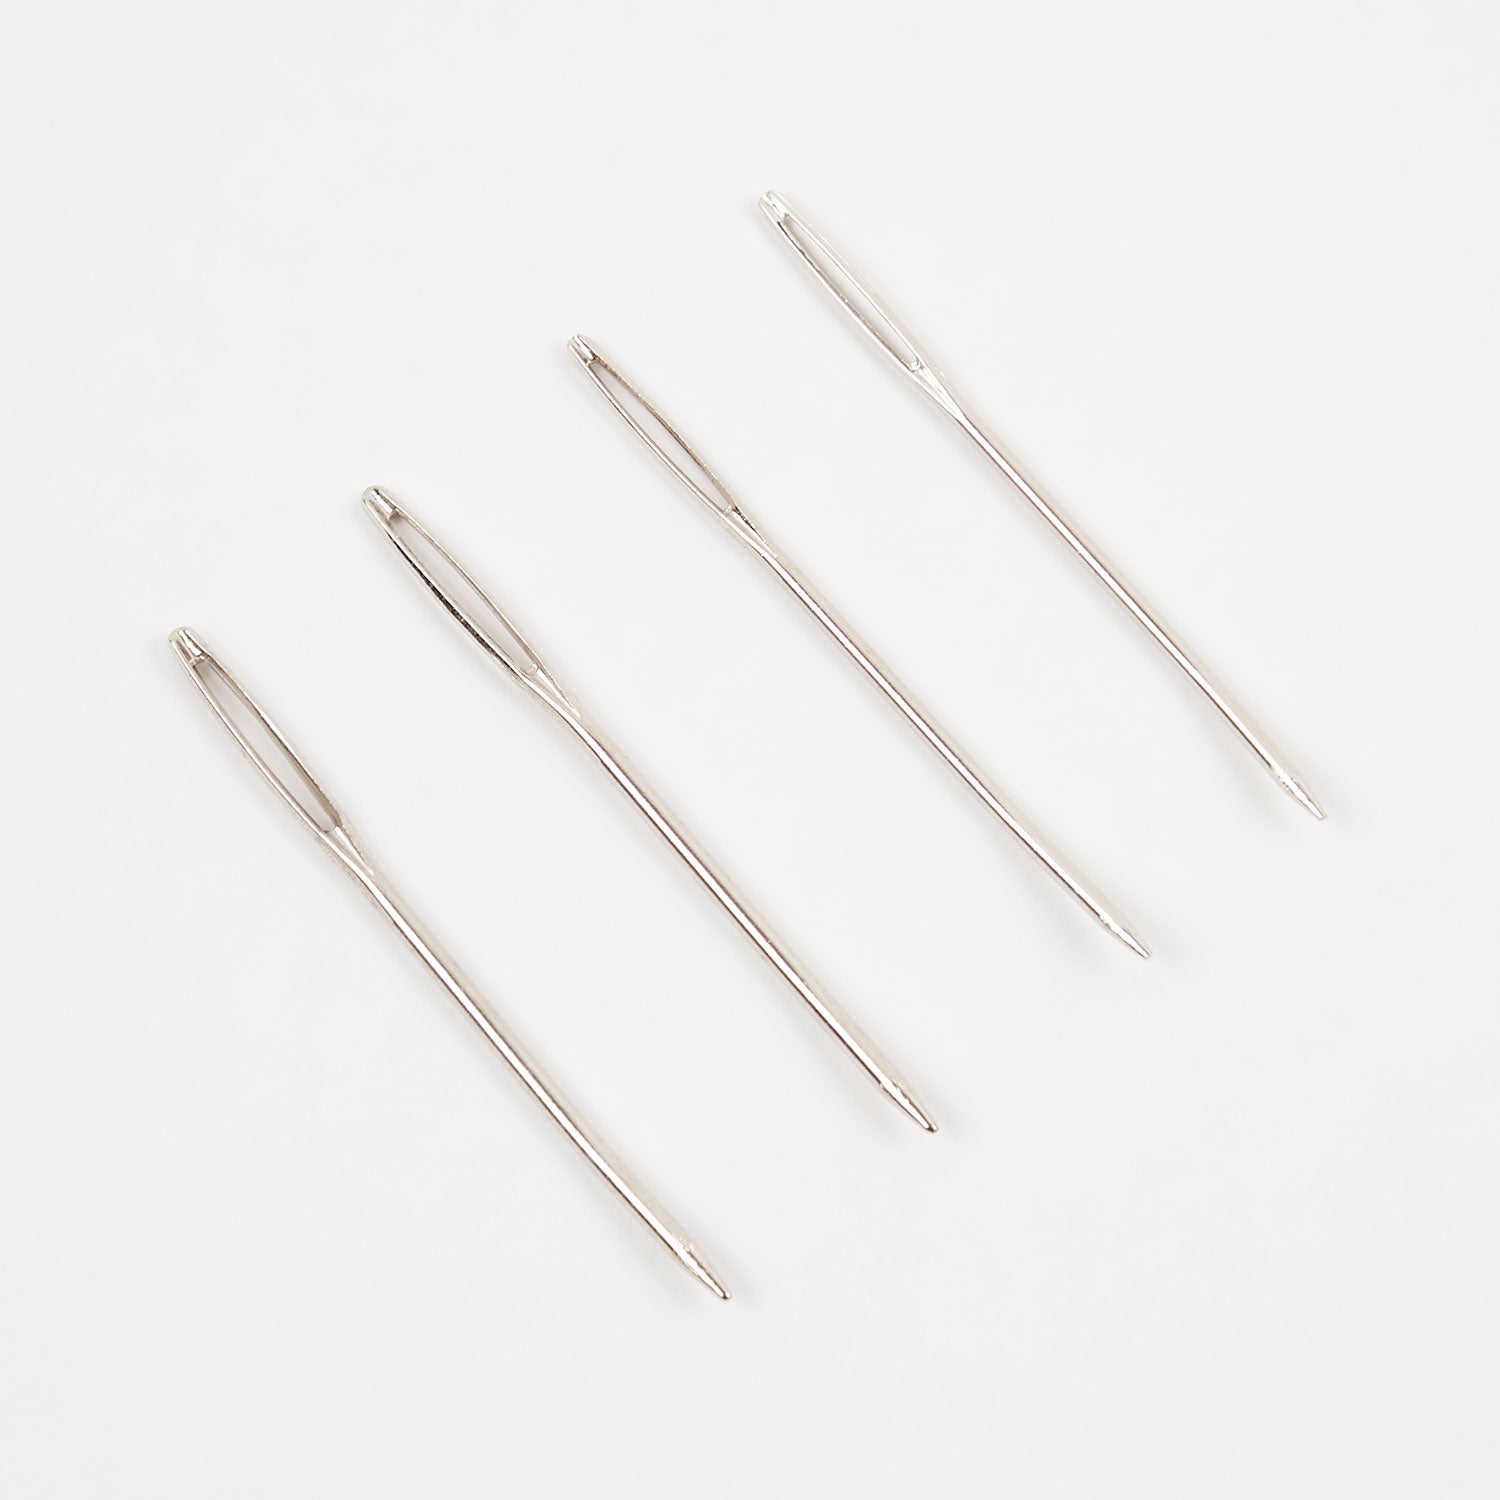 Tulip Tapestry Needles - The Little Yarn Store